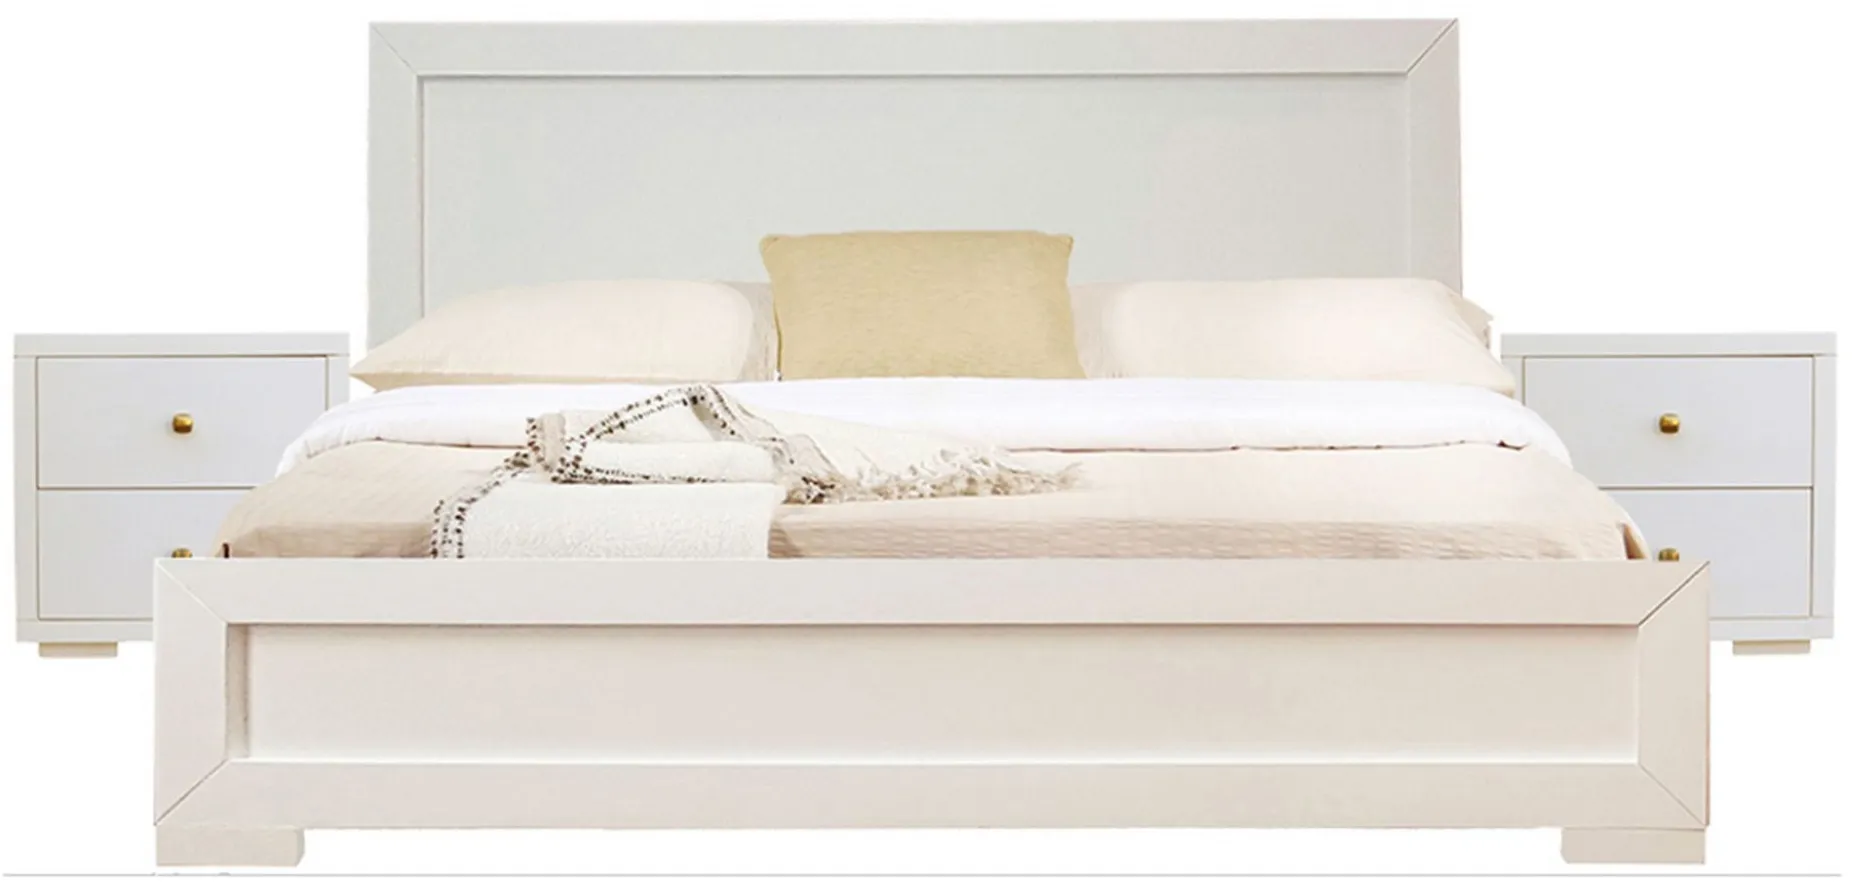 Trent Platform Bed with 2 Nightstands in White by CAMDEN ISLE